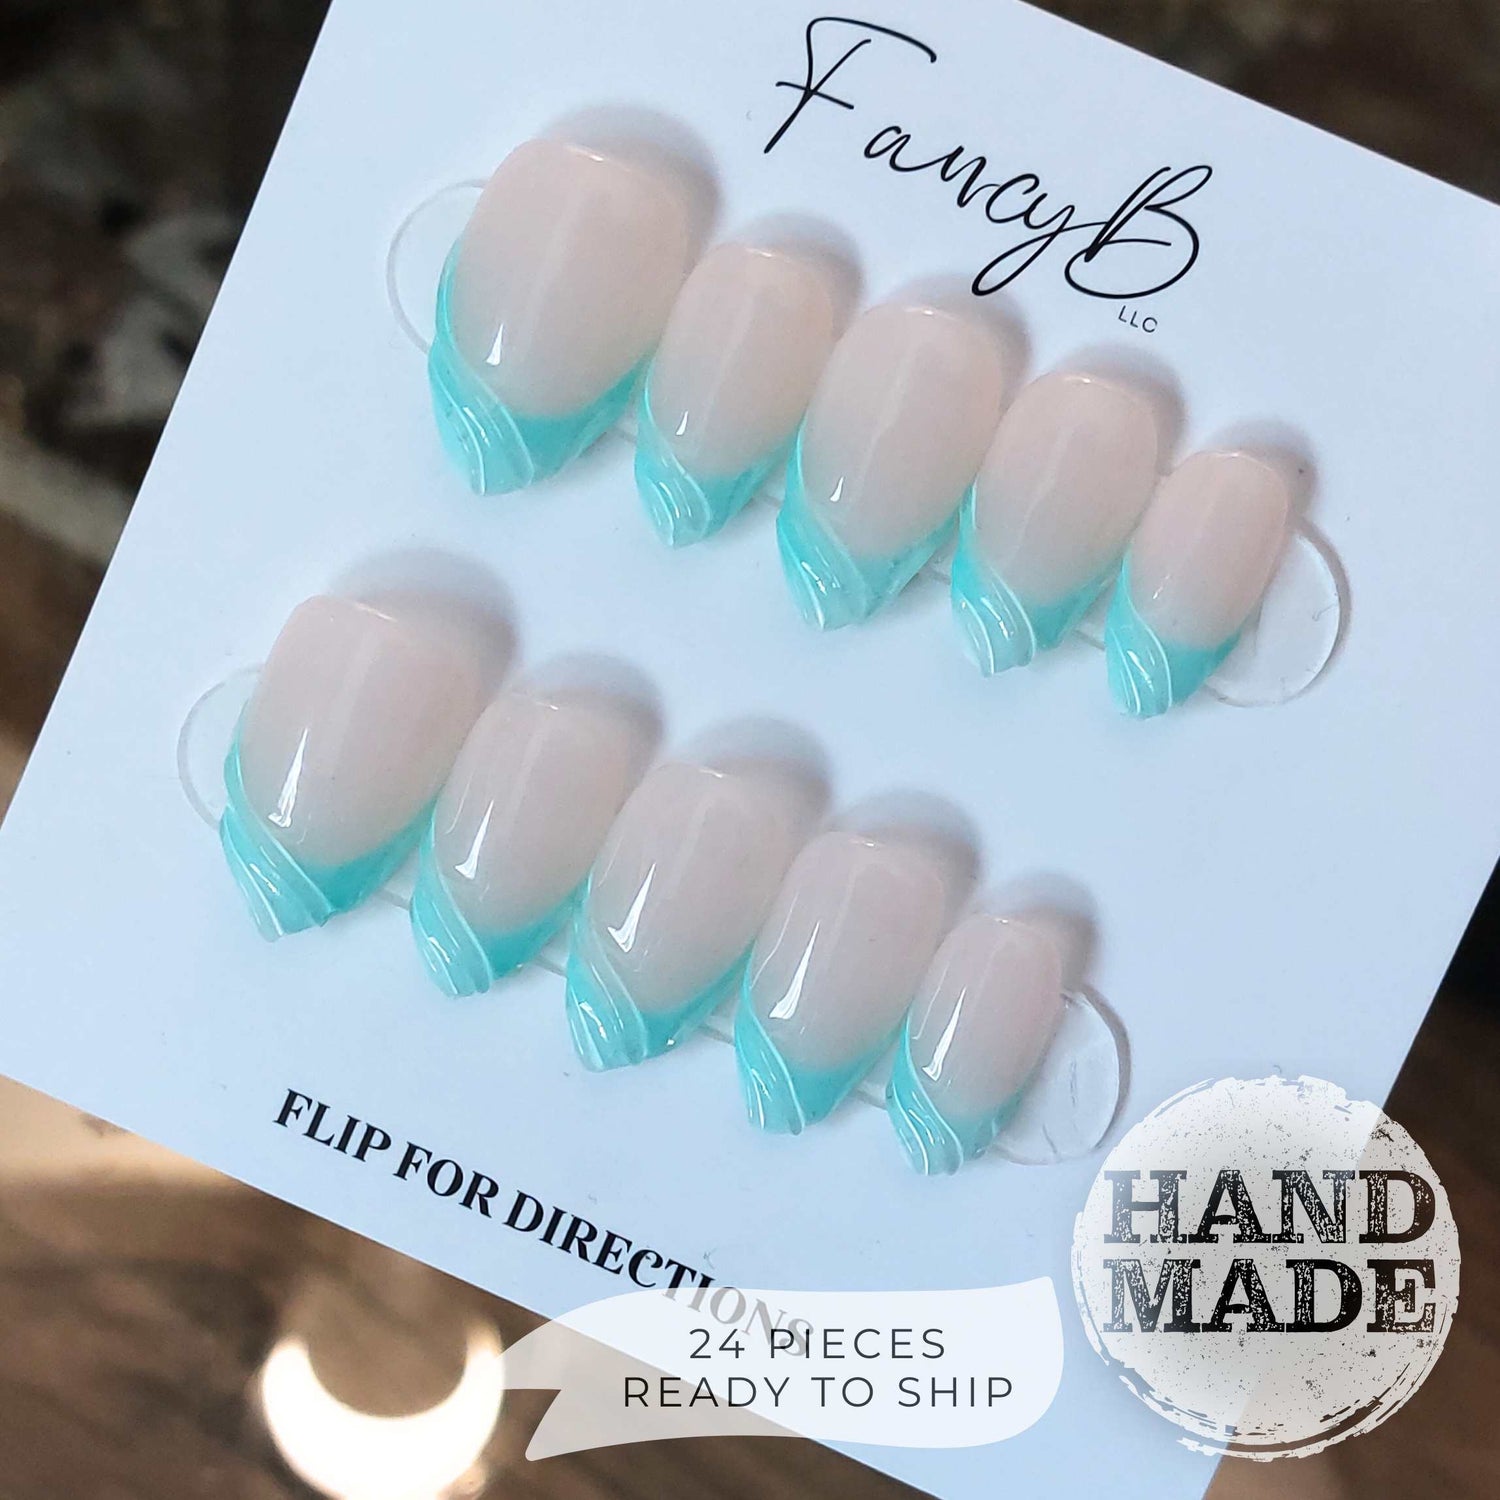 Cyan french tips with 3d swirls, bright mint blue french tip press on nails. Handmade reusable press on nails from FancyB Nails show in short almond.